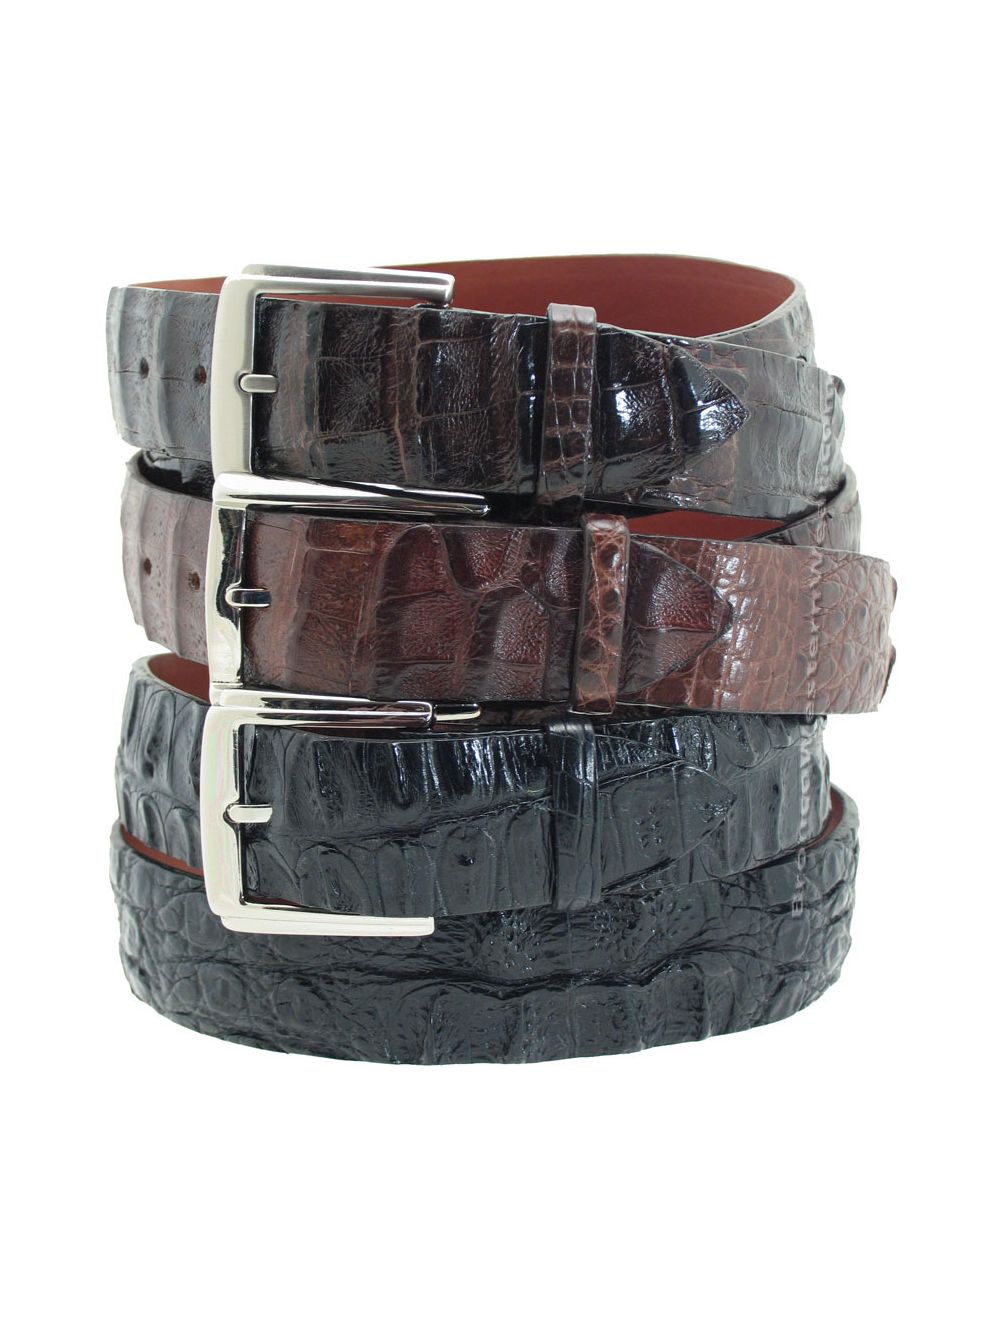 New Mens Black Crocodile Texture Pin Buckle Genuine Leather Belts S-3XL 